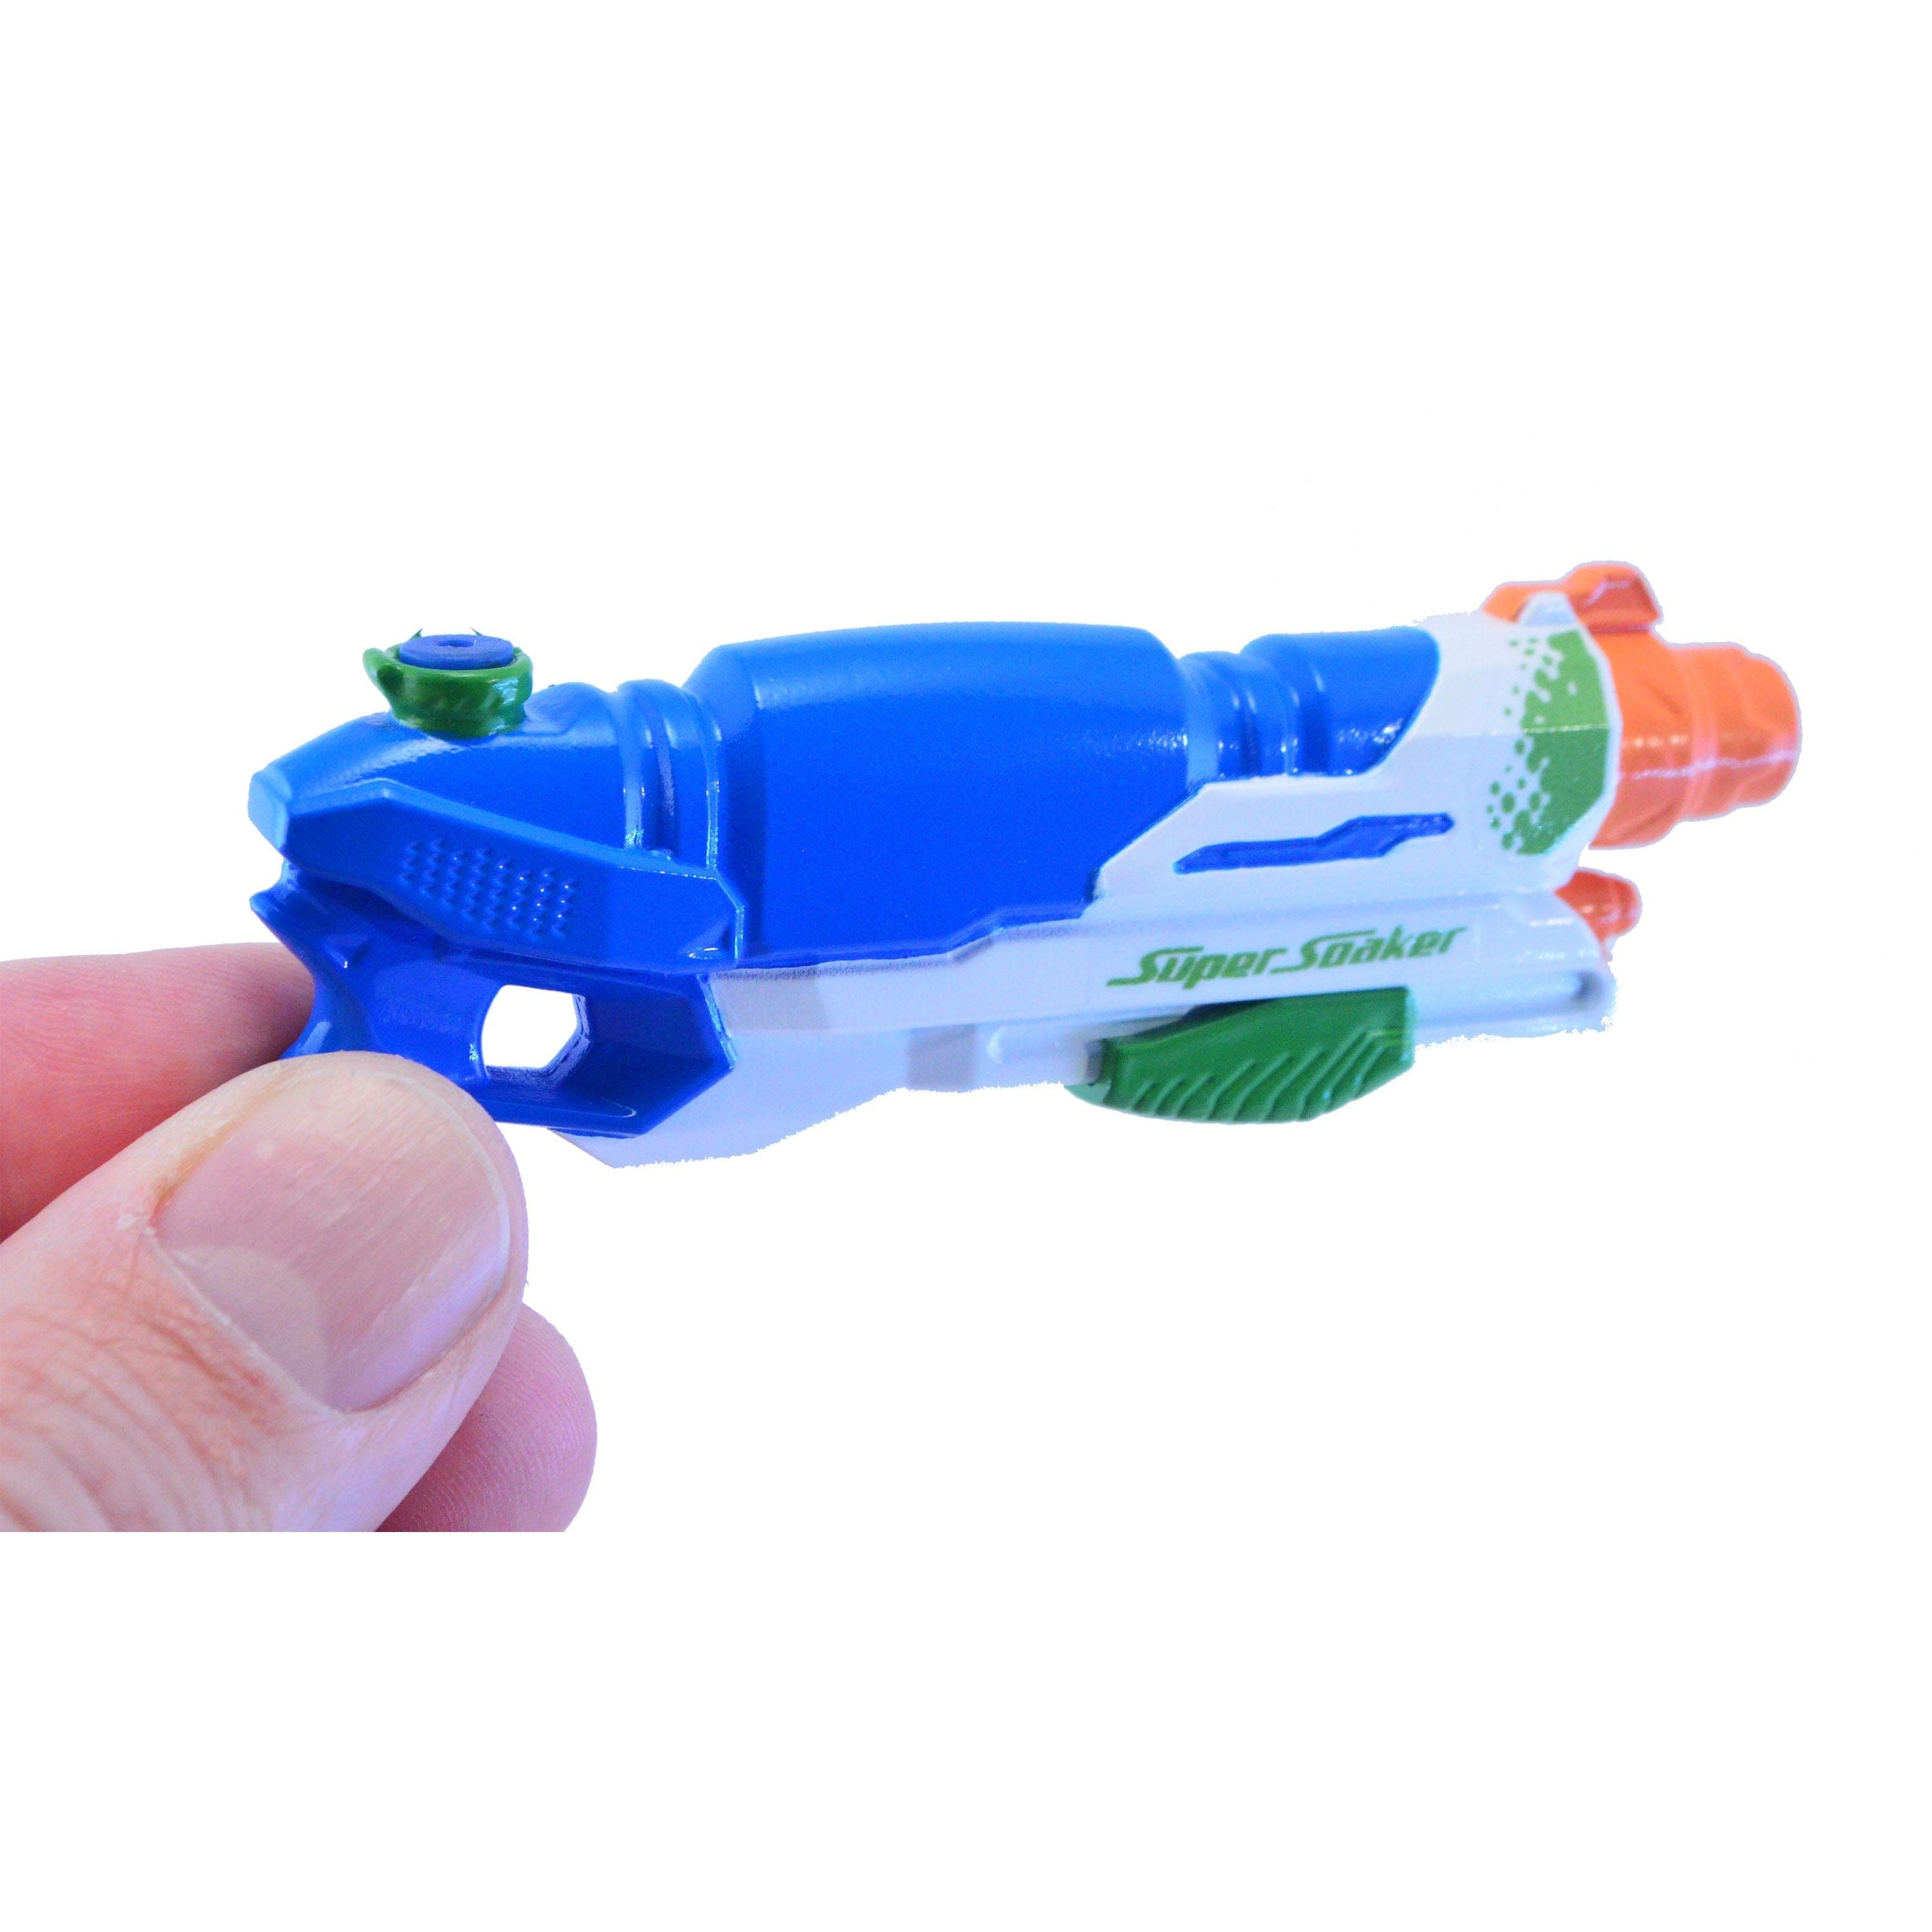 Super Impulse-World's Smallest Super Soaker Assorted Styles-576-Legacy Toys